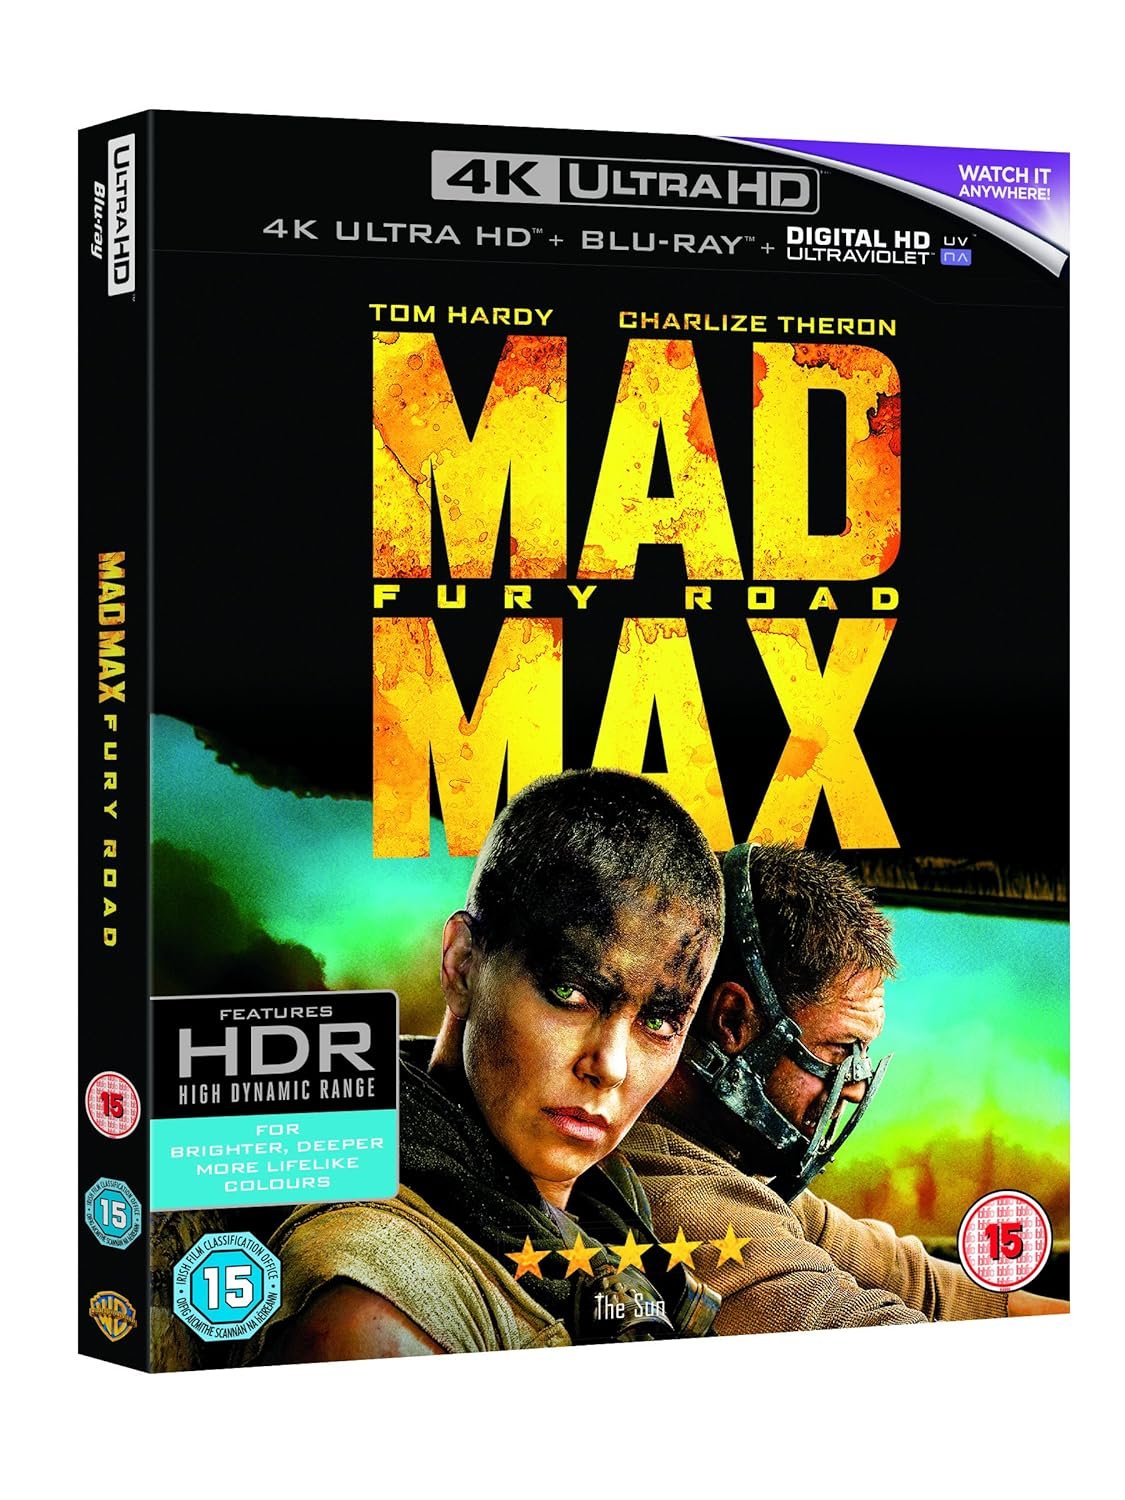 Box cover for the Mad Max: Fury Road (4K Ultra HD Blu-ray) [4K UHD] film, featuring images of Tom Hardy and Charlize Theron with the desolate wasteland background.